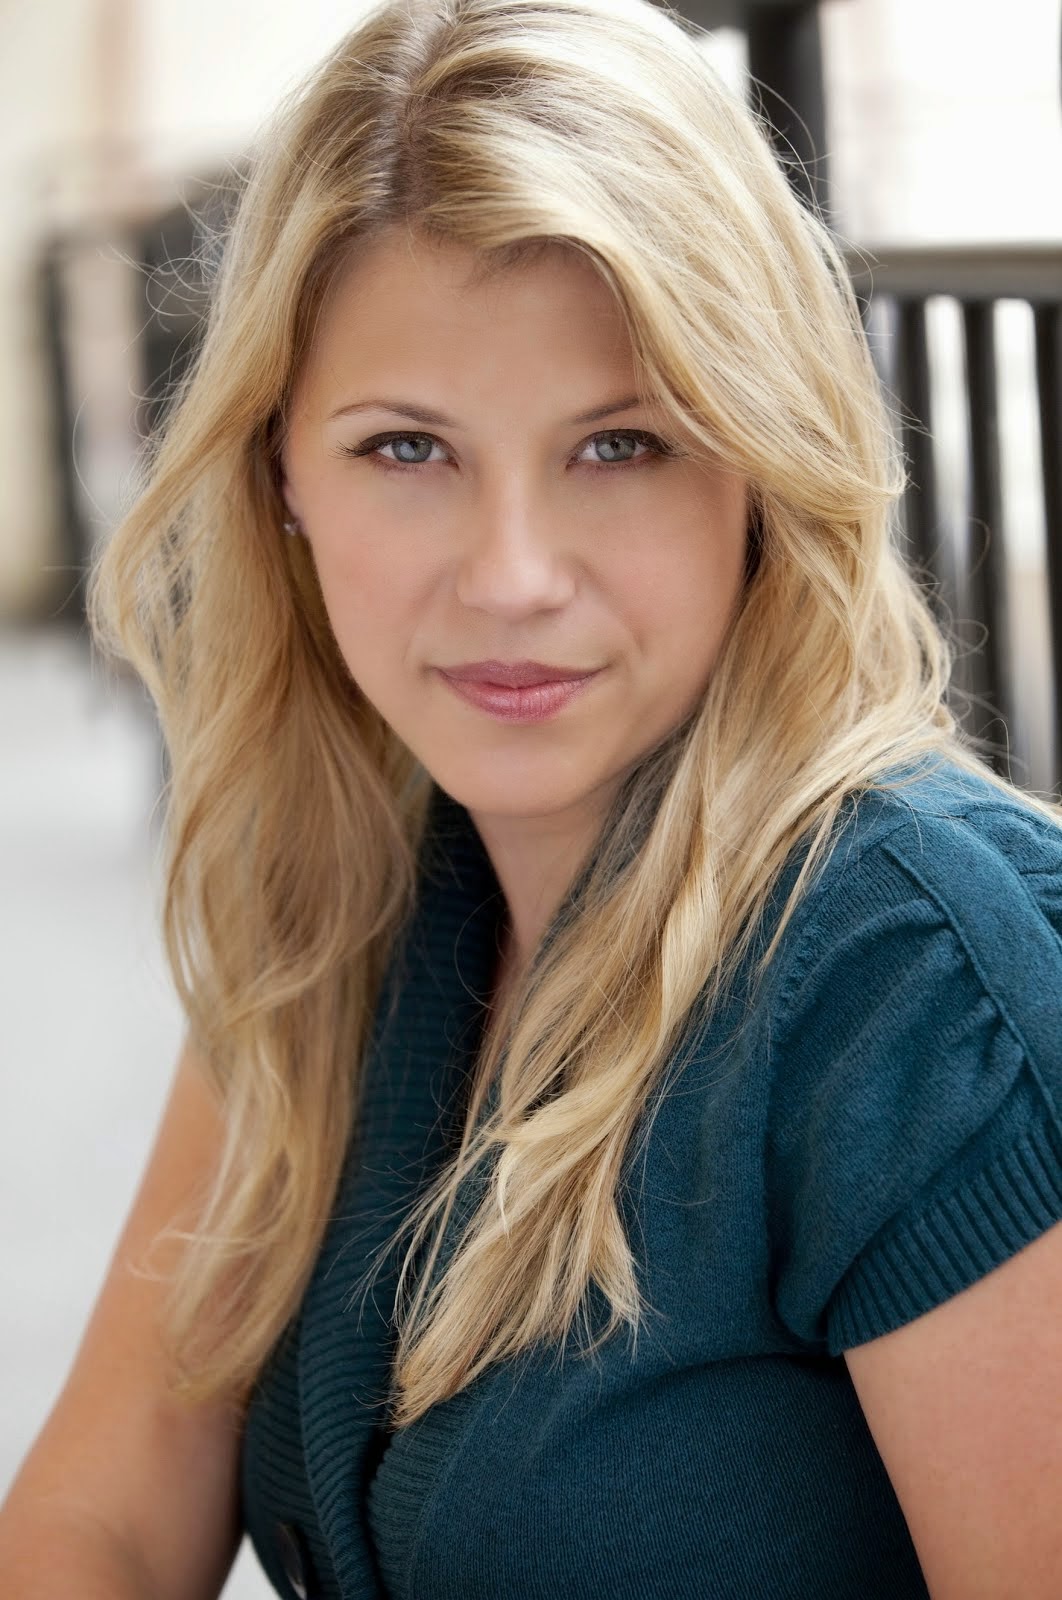 april anne chua recommends Jodie Sweetin Adult Film